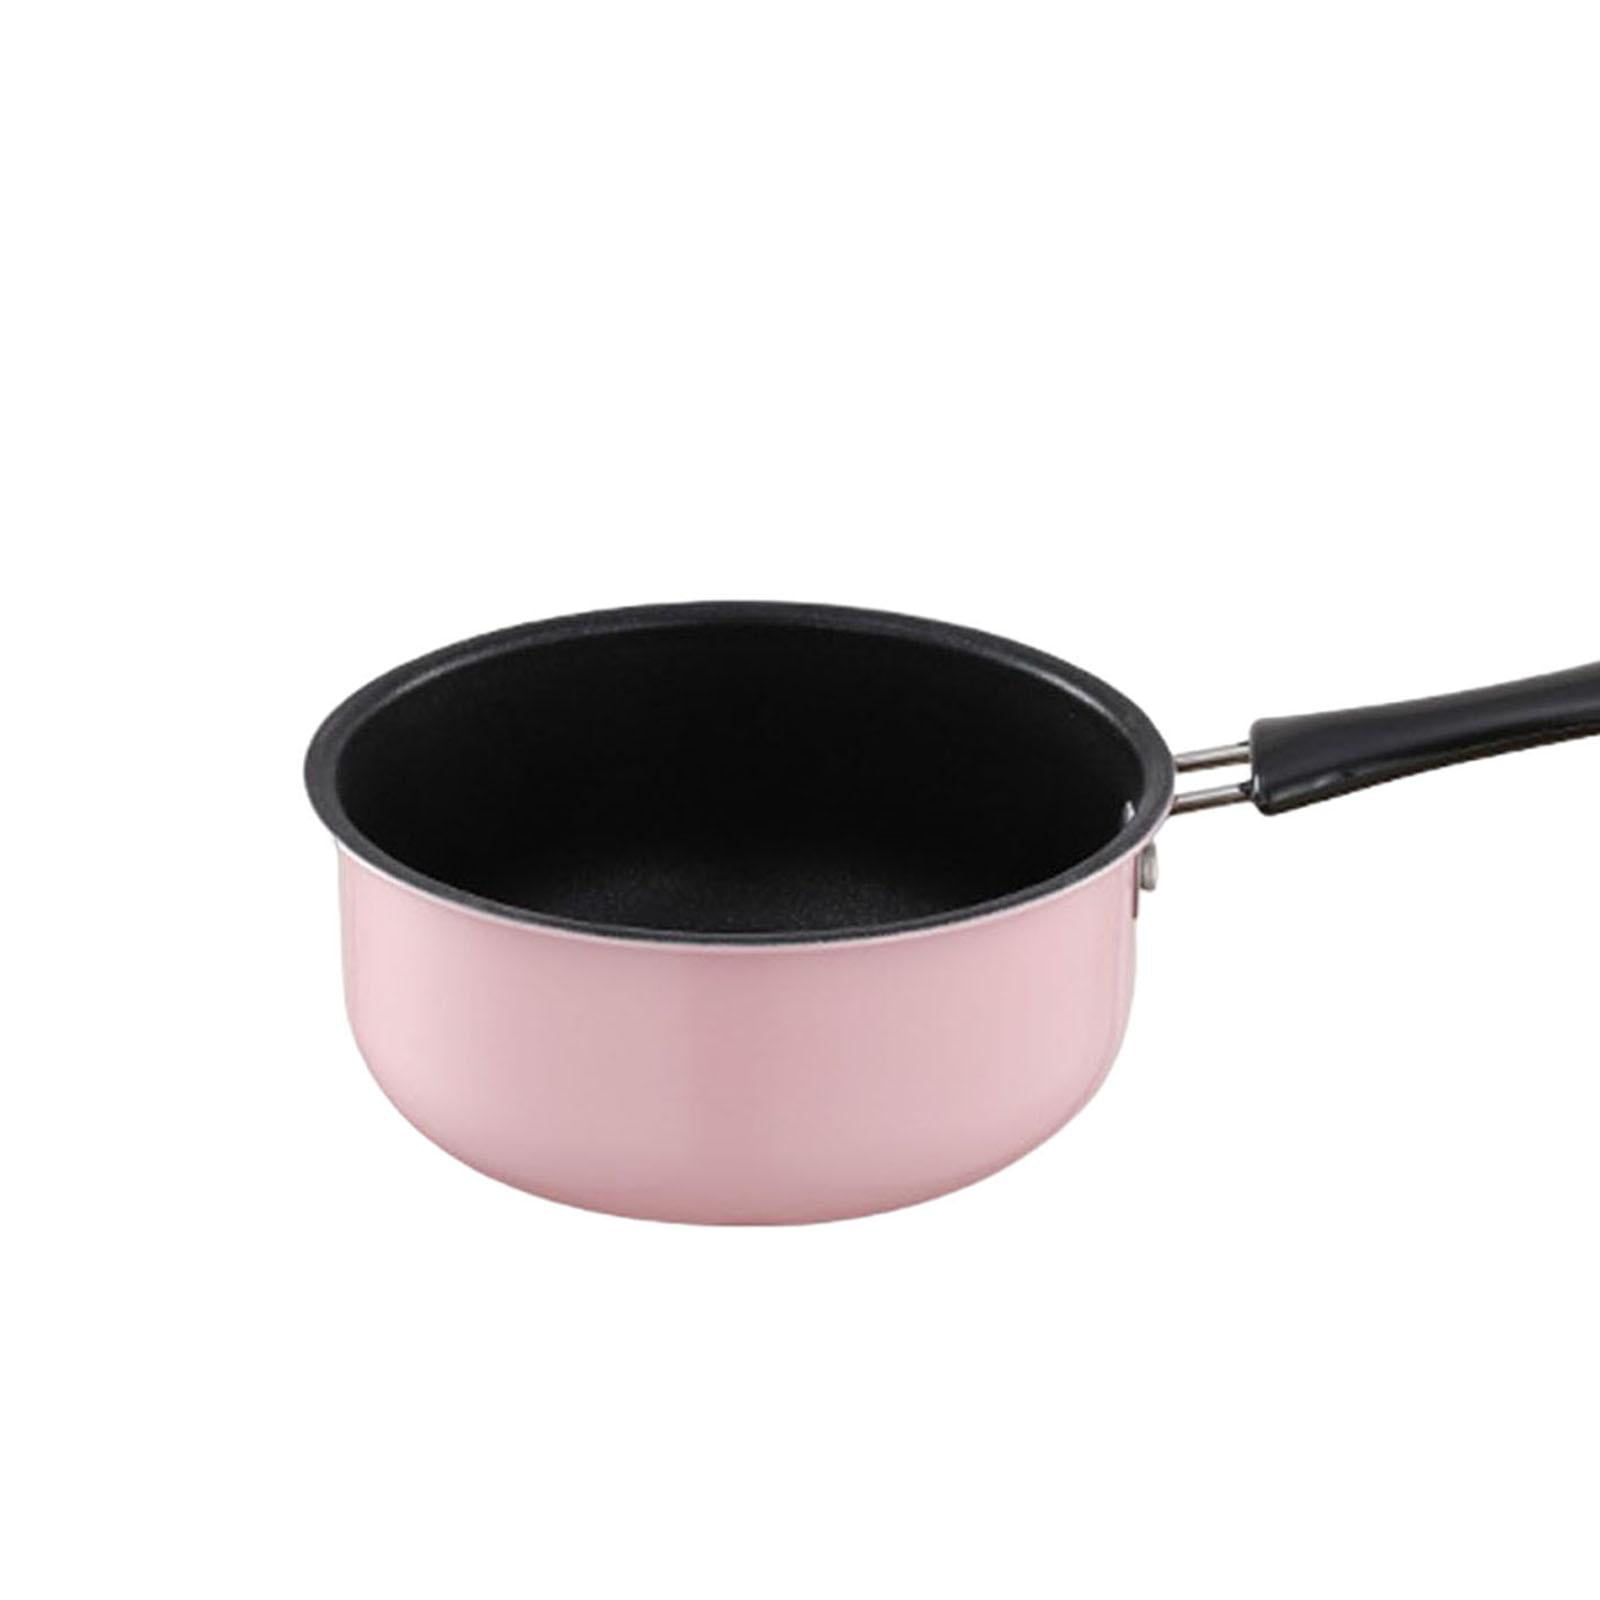 Milk Pan-Milk Pot Non stick Mini Saucepan Butter Warmer with Wooden Handle  Small Cookware, Perfect Size for Heating Smaller Liquid Portions 